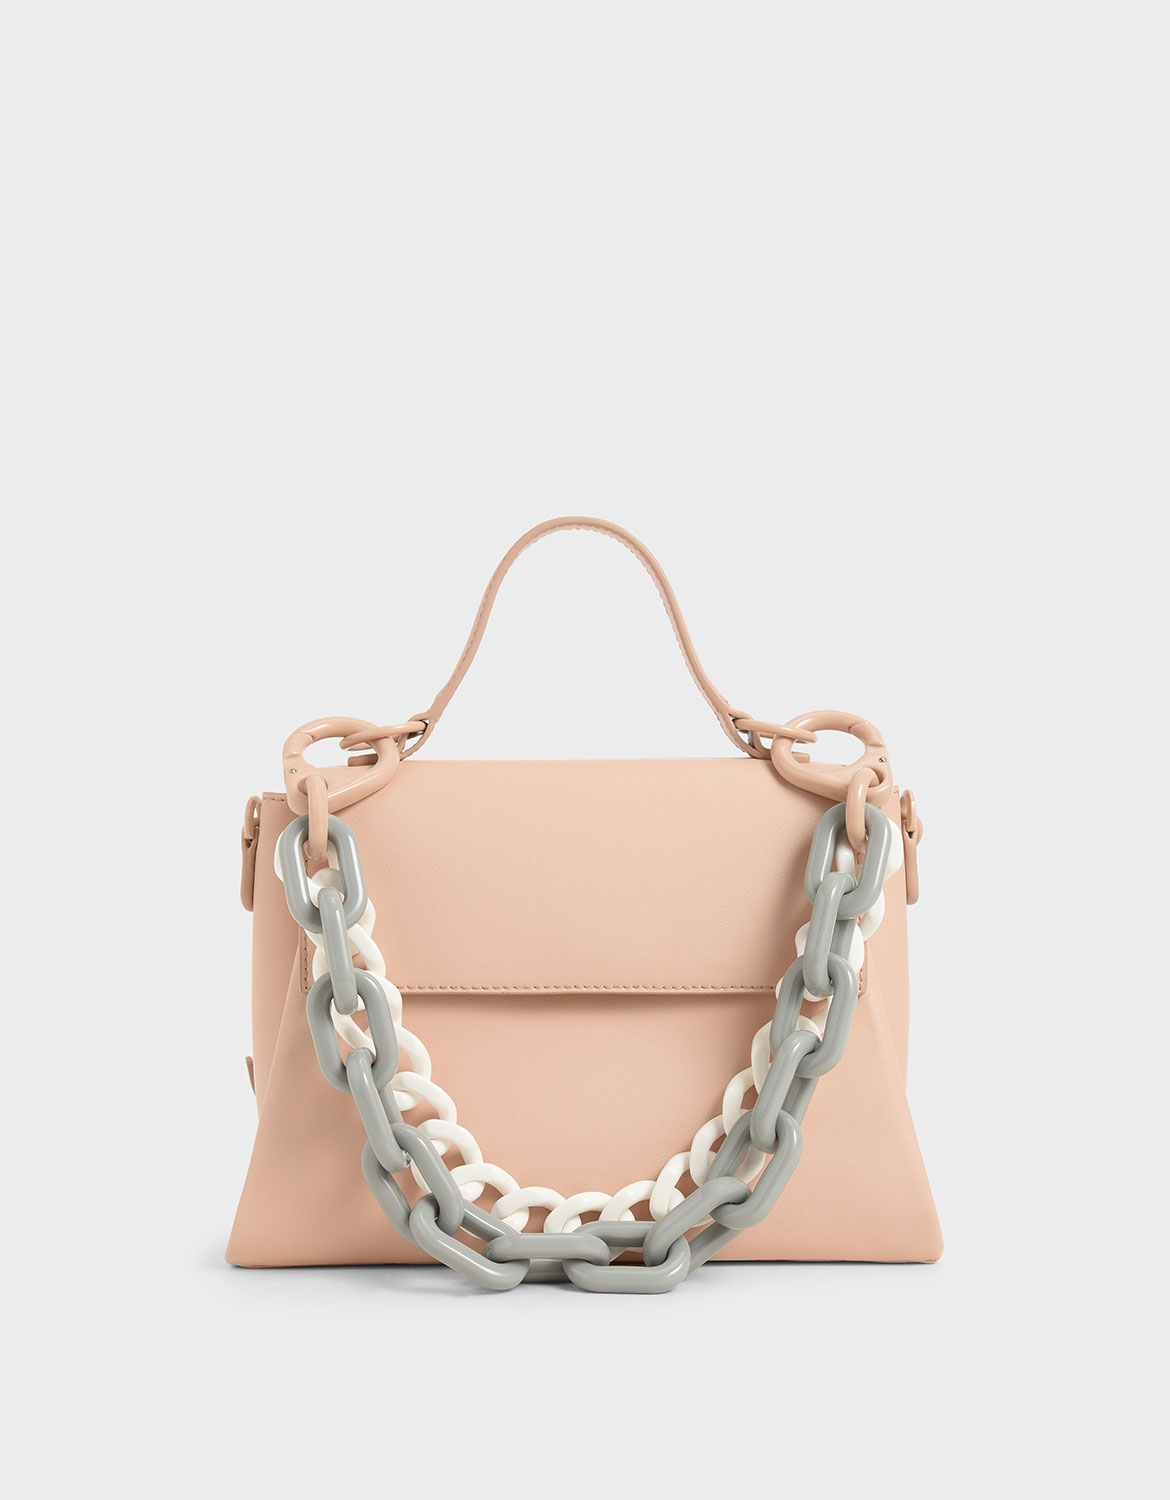 Double Chain Link Bag